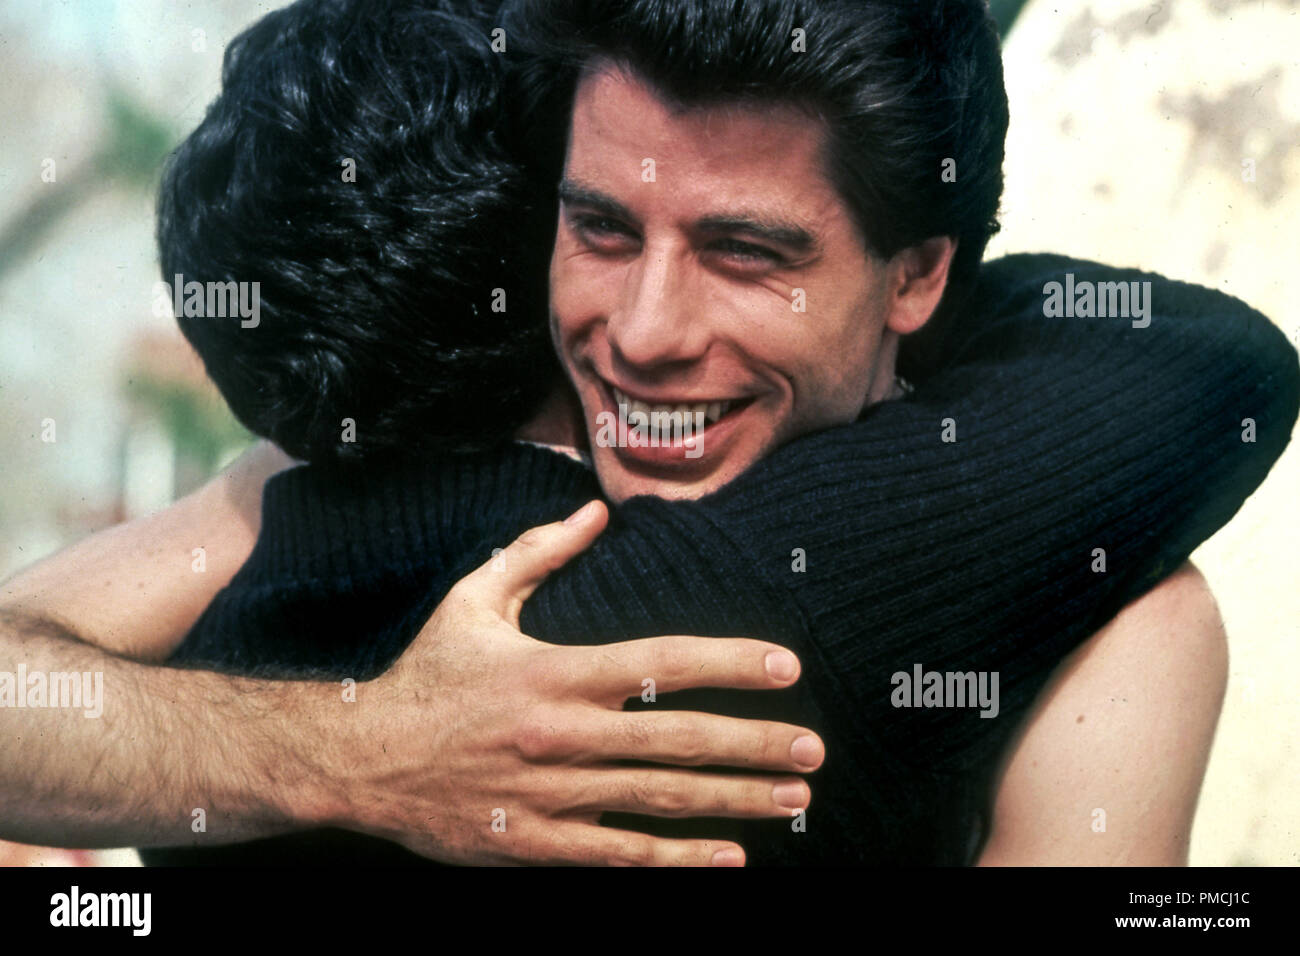 John Travolta,  'Saturday Night Fever'  (1977) Paramount Pictures   File Reference # 33650 145THA  For Editorial Use Only -  All Rights Reserved Stock Photo